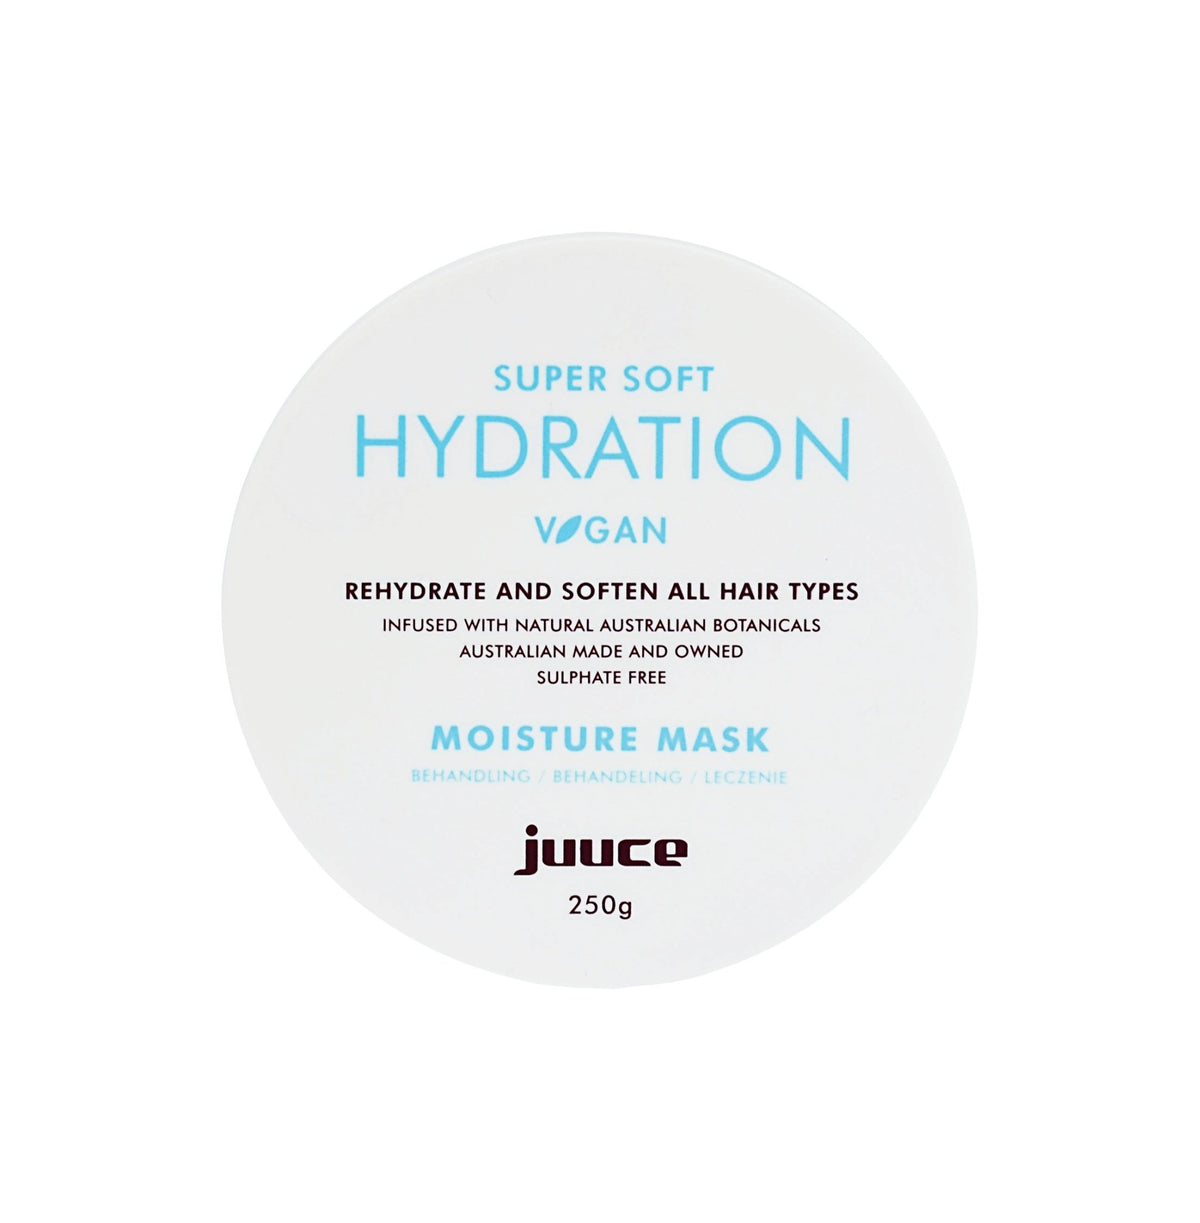 Juuce Super soft hydration - Haircare Superstore